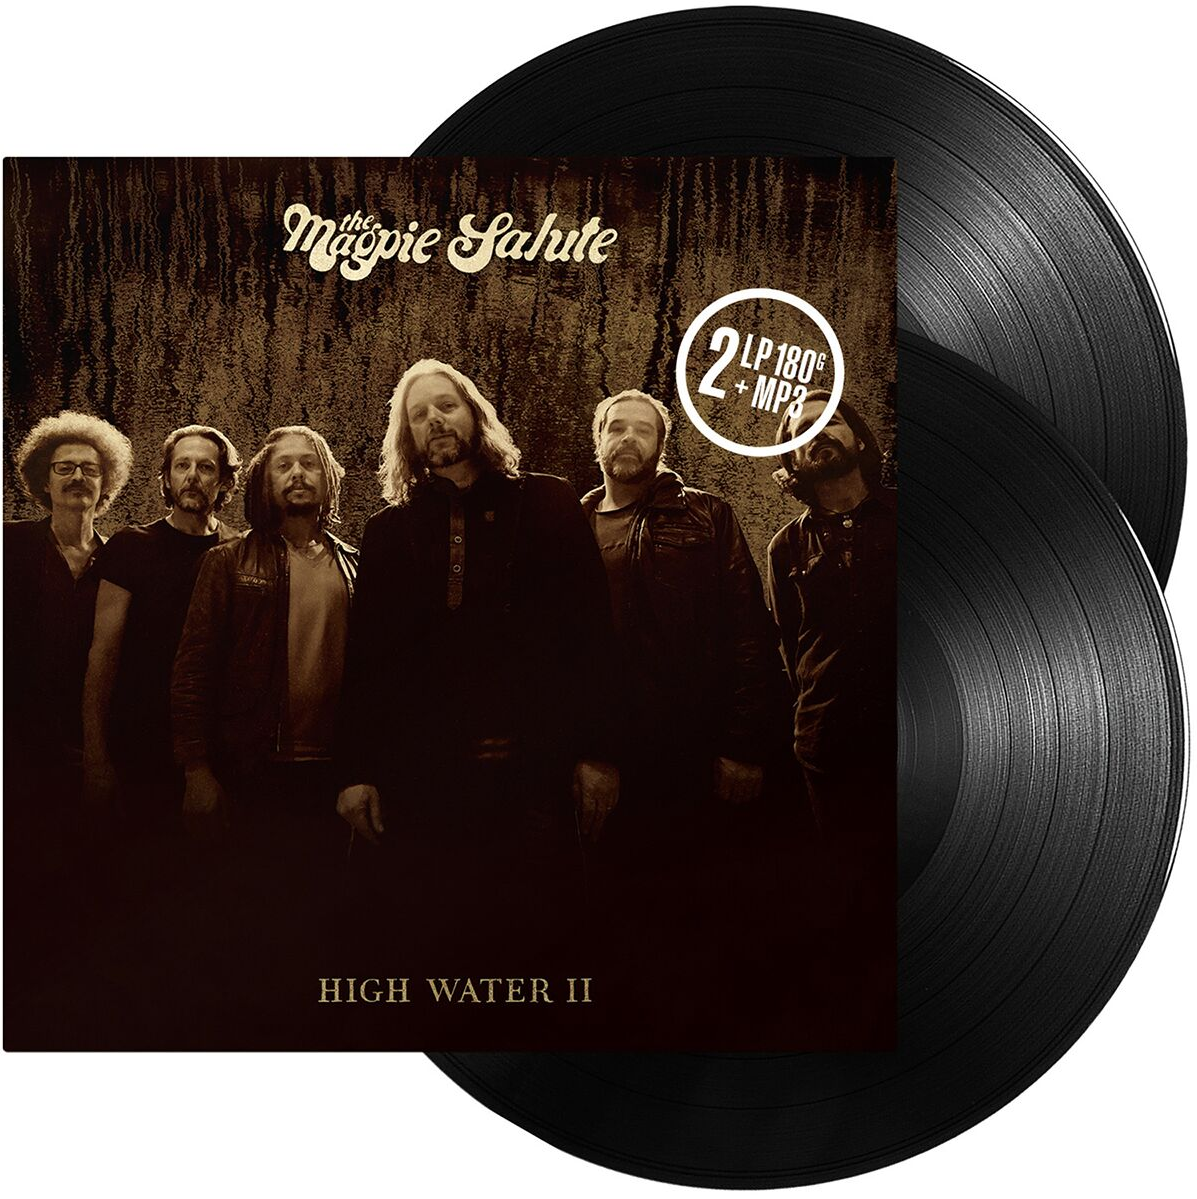 Magpie Salute - High Water II